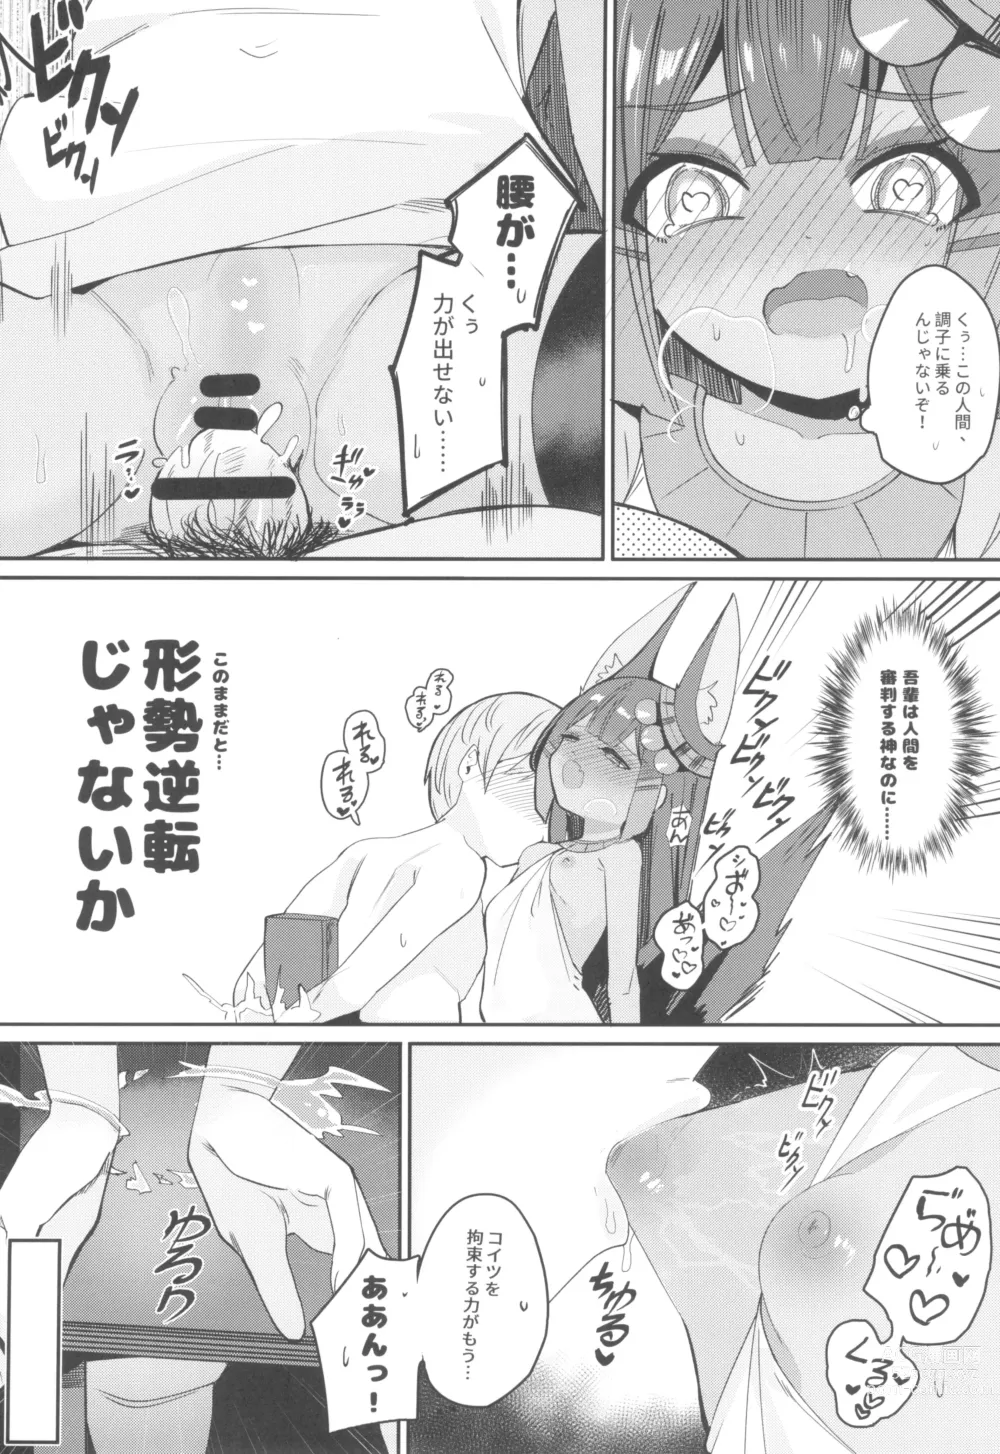 Page 20 of doujinshi Anubis no Ero Shisha Shinpan - She is the oldest FBI in human history and will find souls who have erotic thoughts about loli